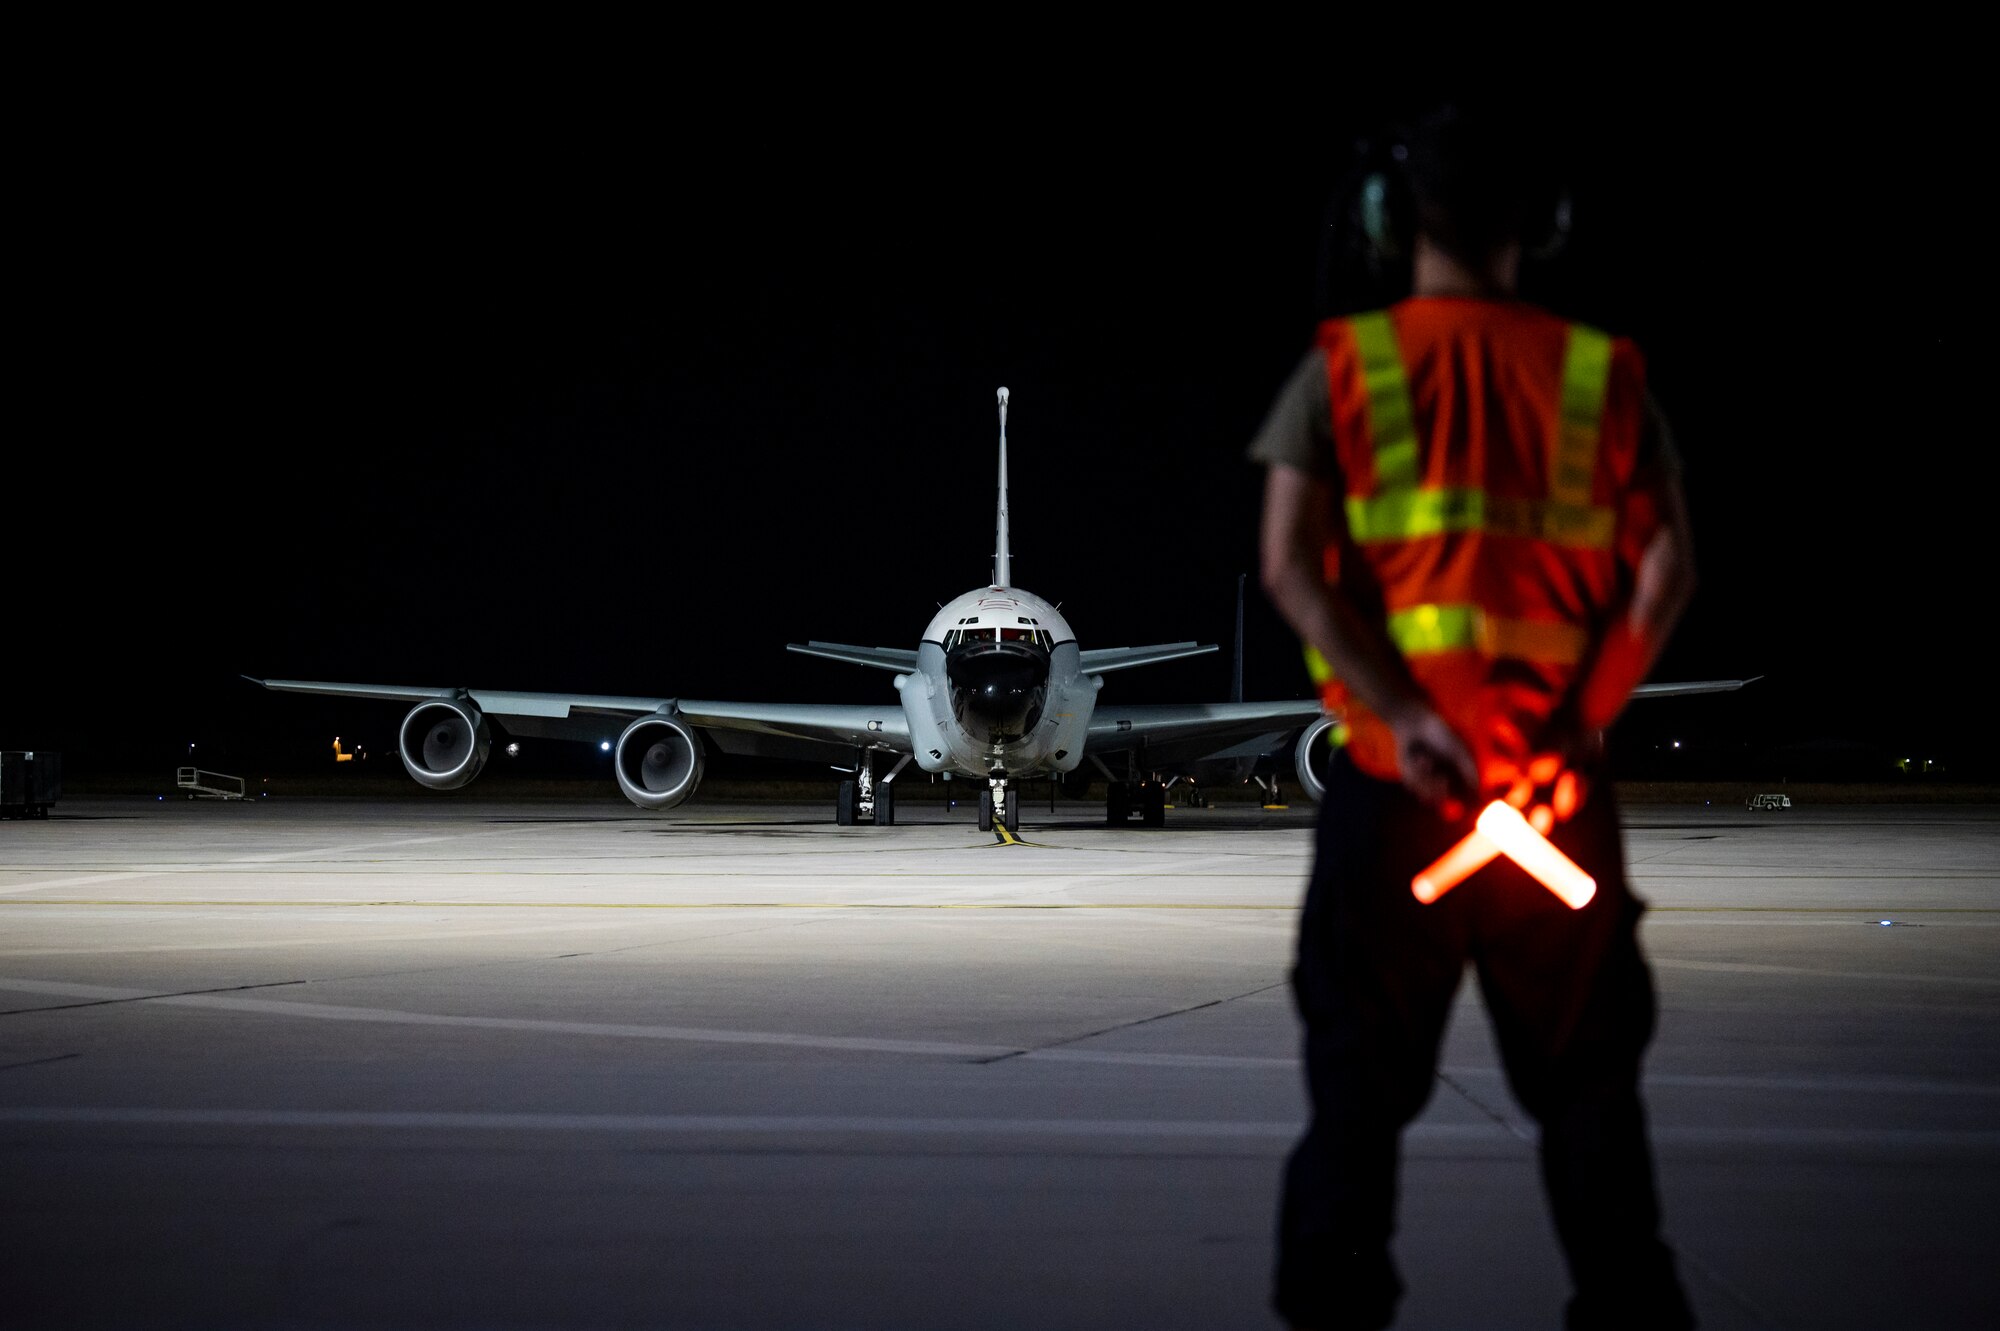 Service member standing on the flight line at night with an aircraft in the background